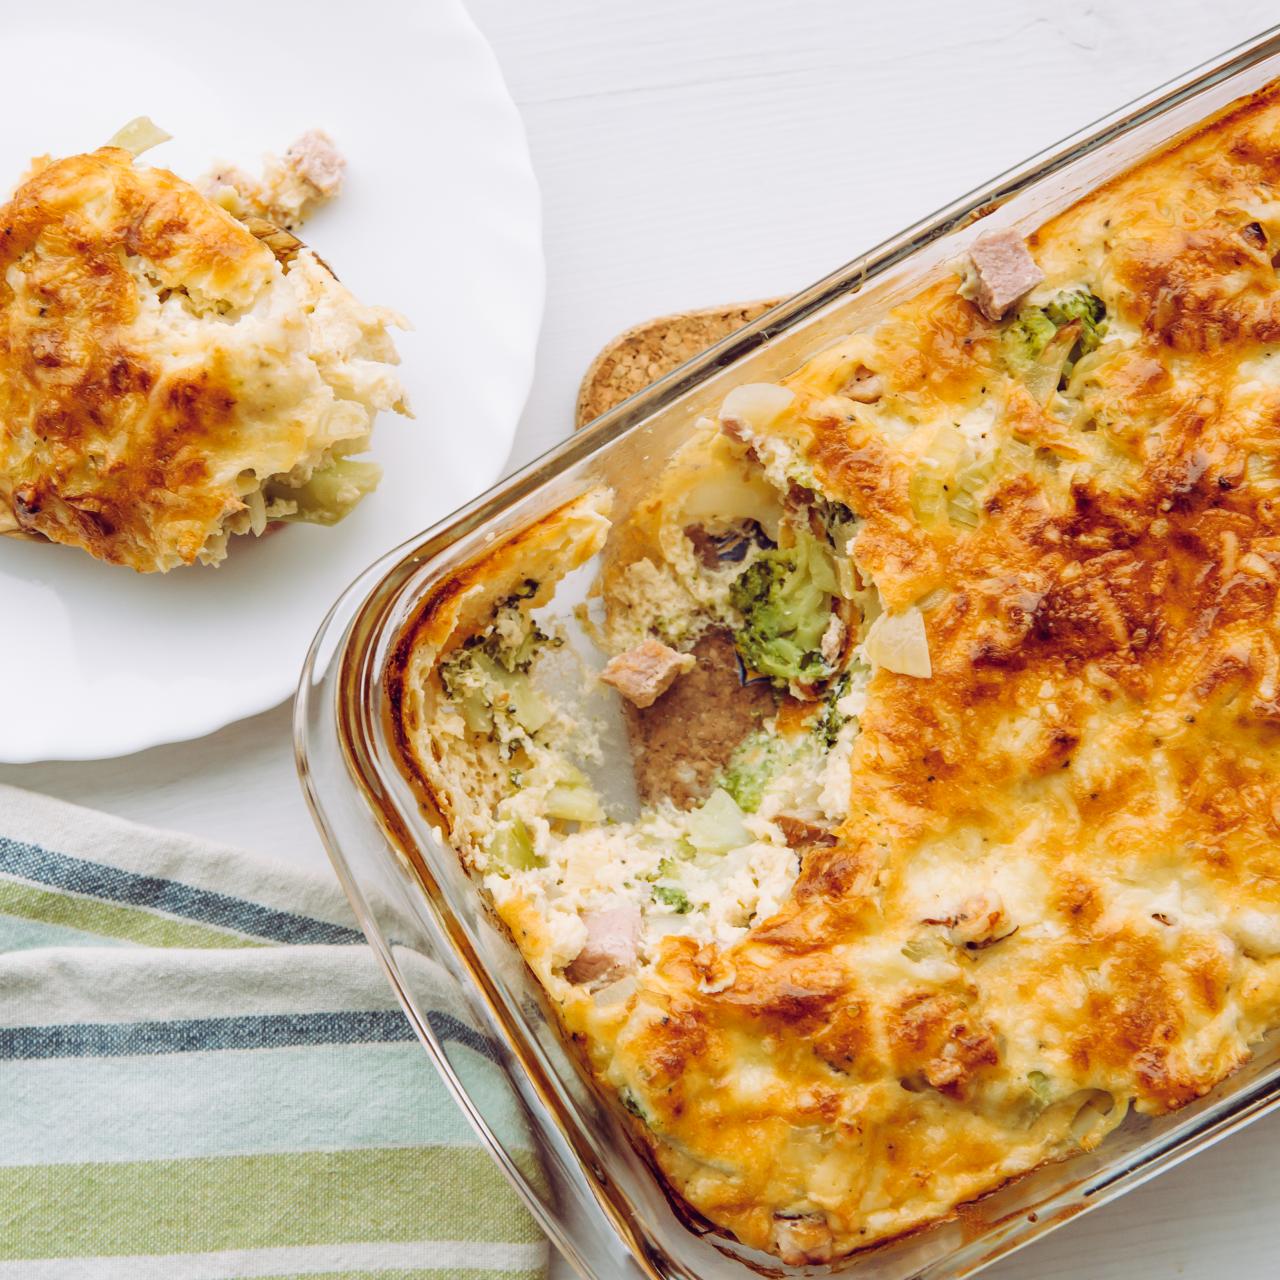 What Is a Casserole Exactly? Defining the Retro Dish